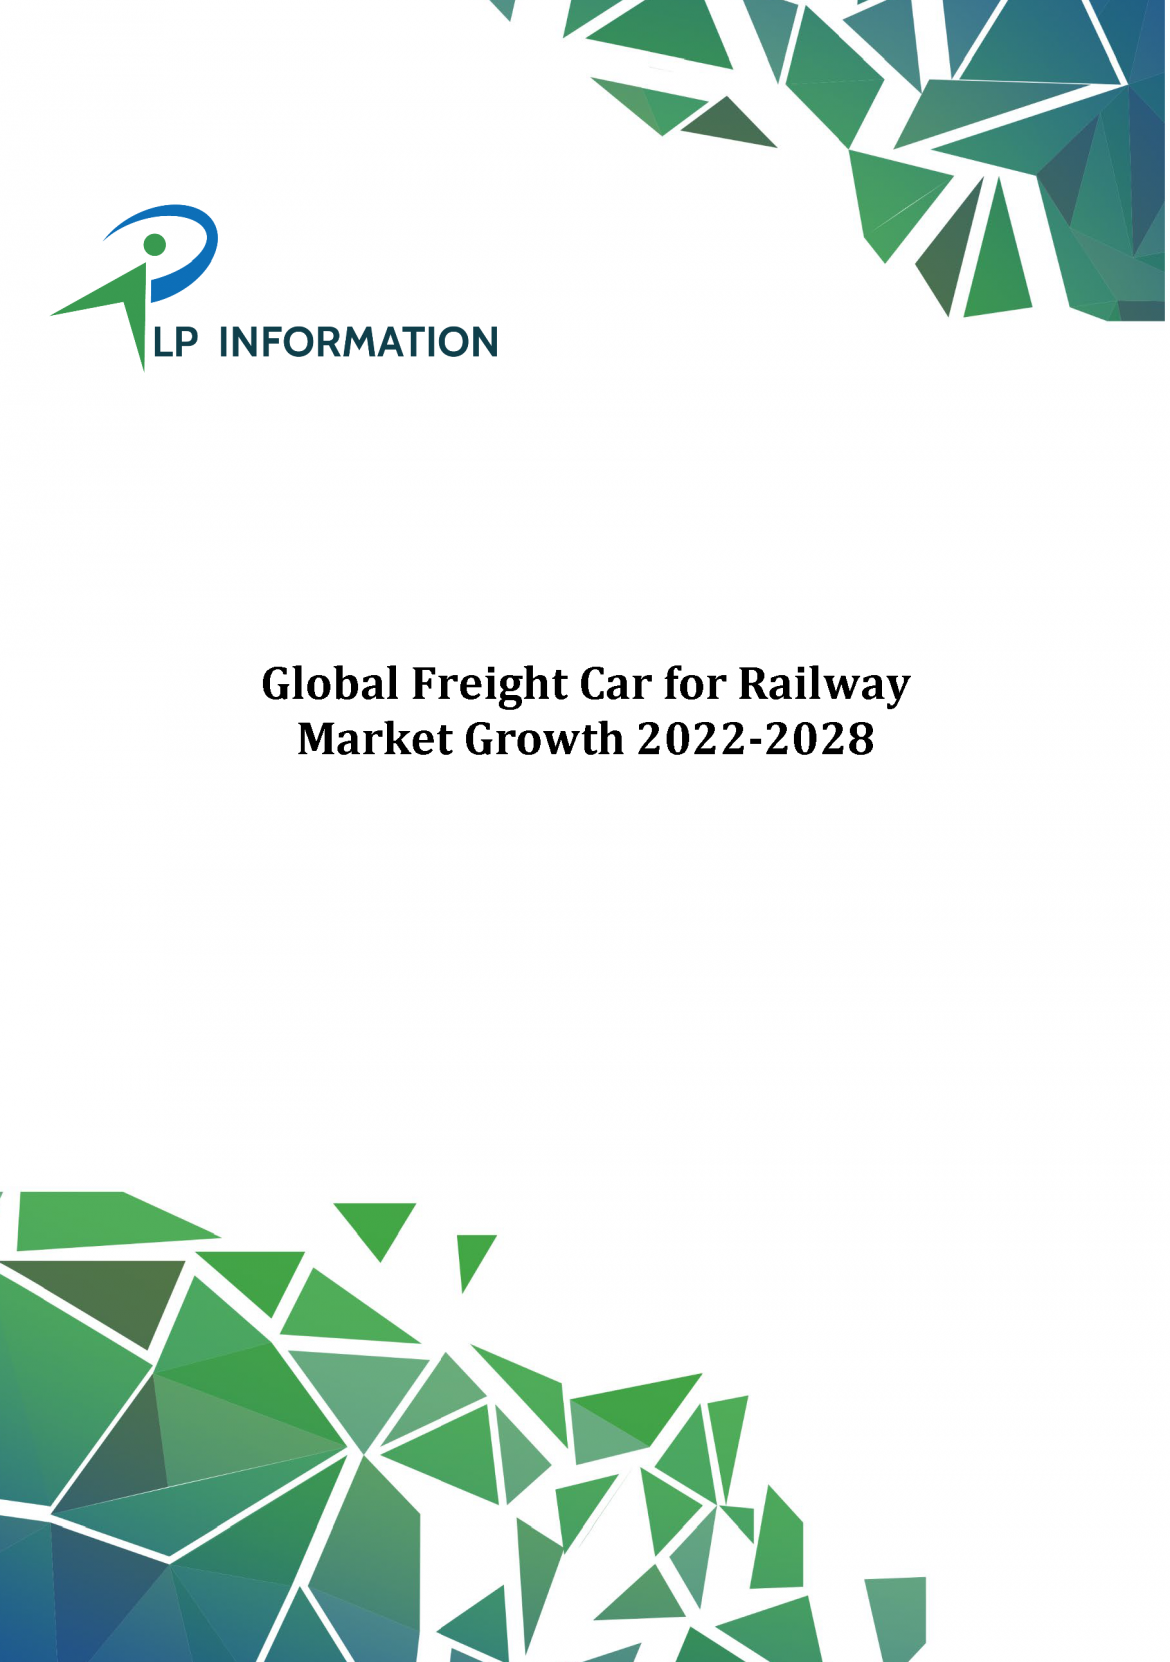 Global Freight Car for Railway Market Growth 2022-2028